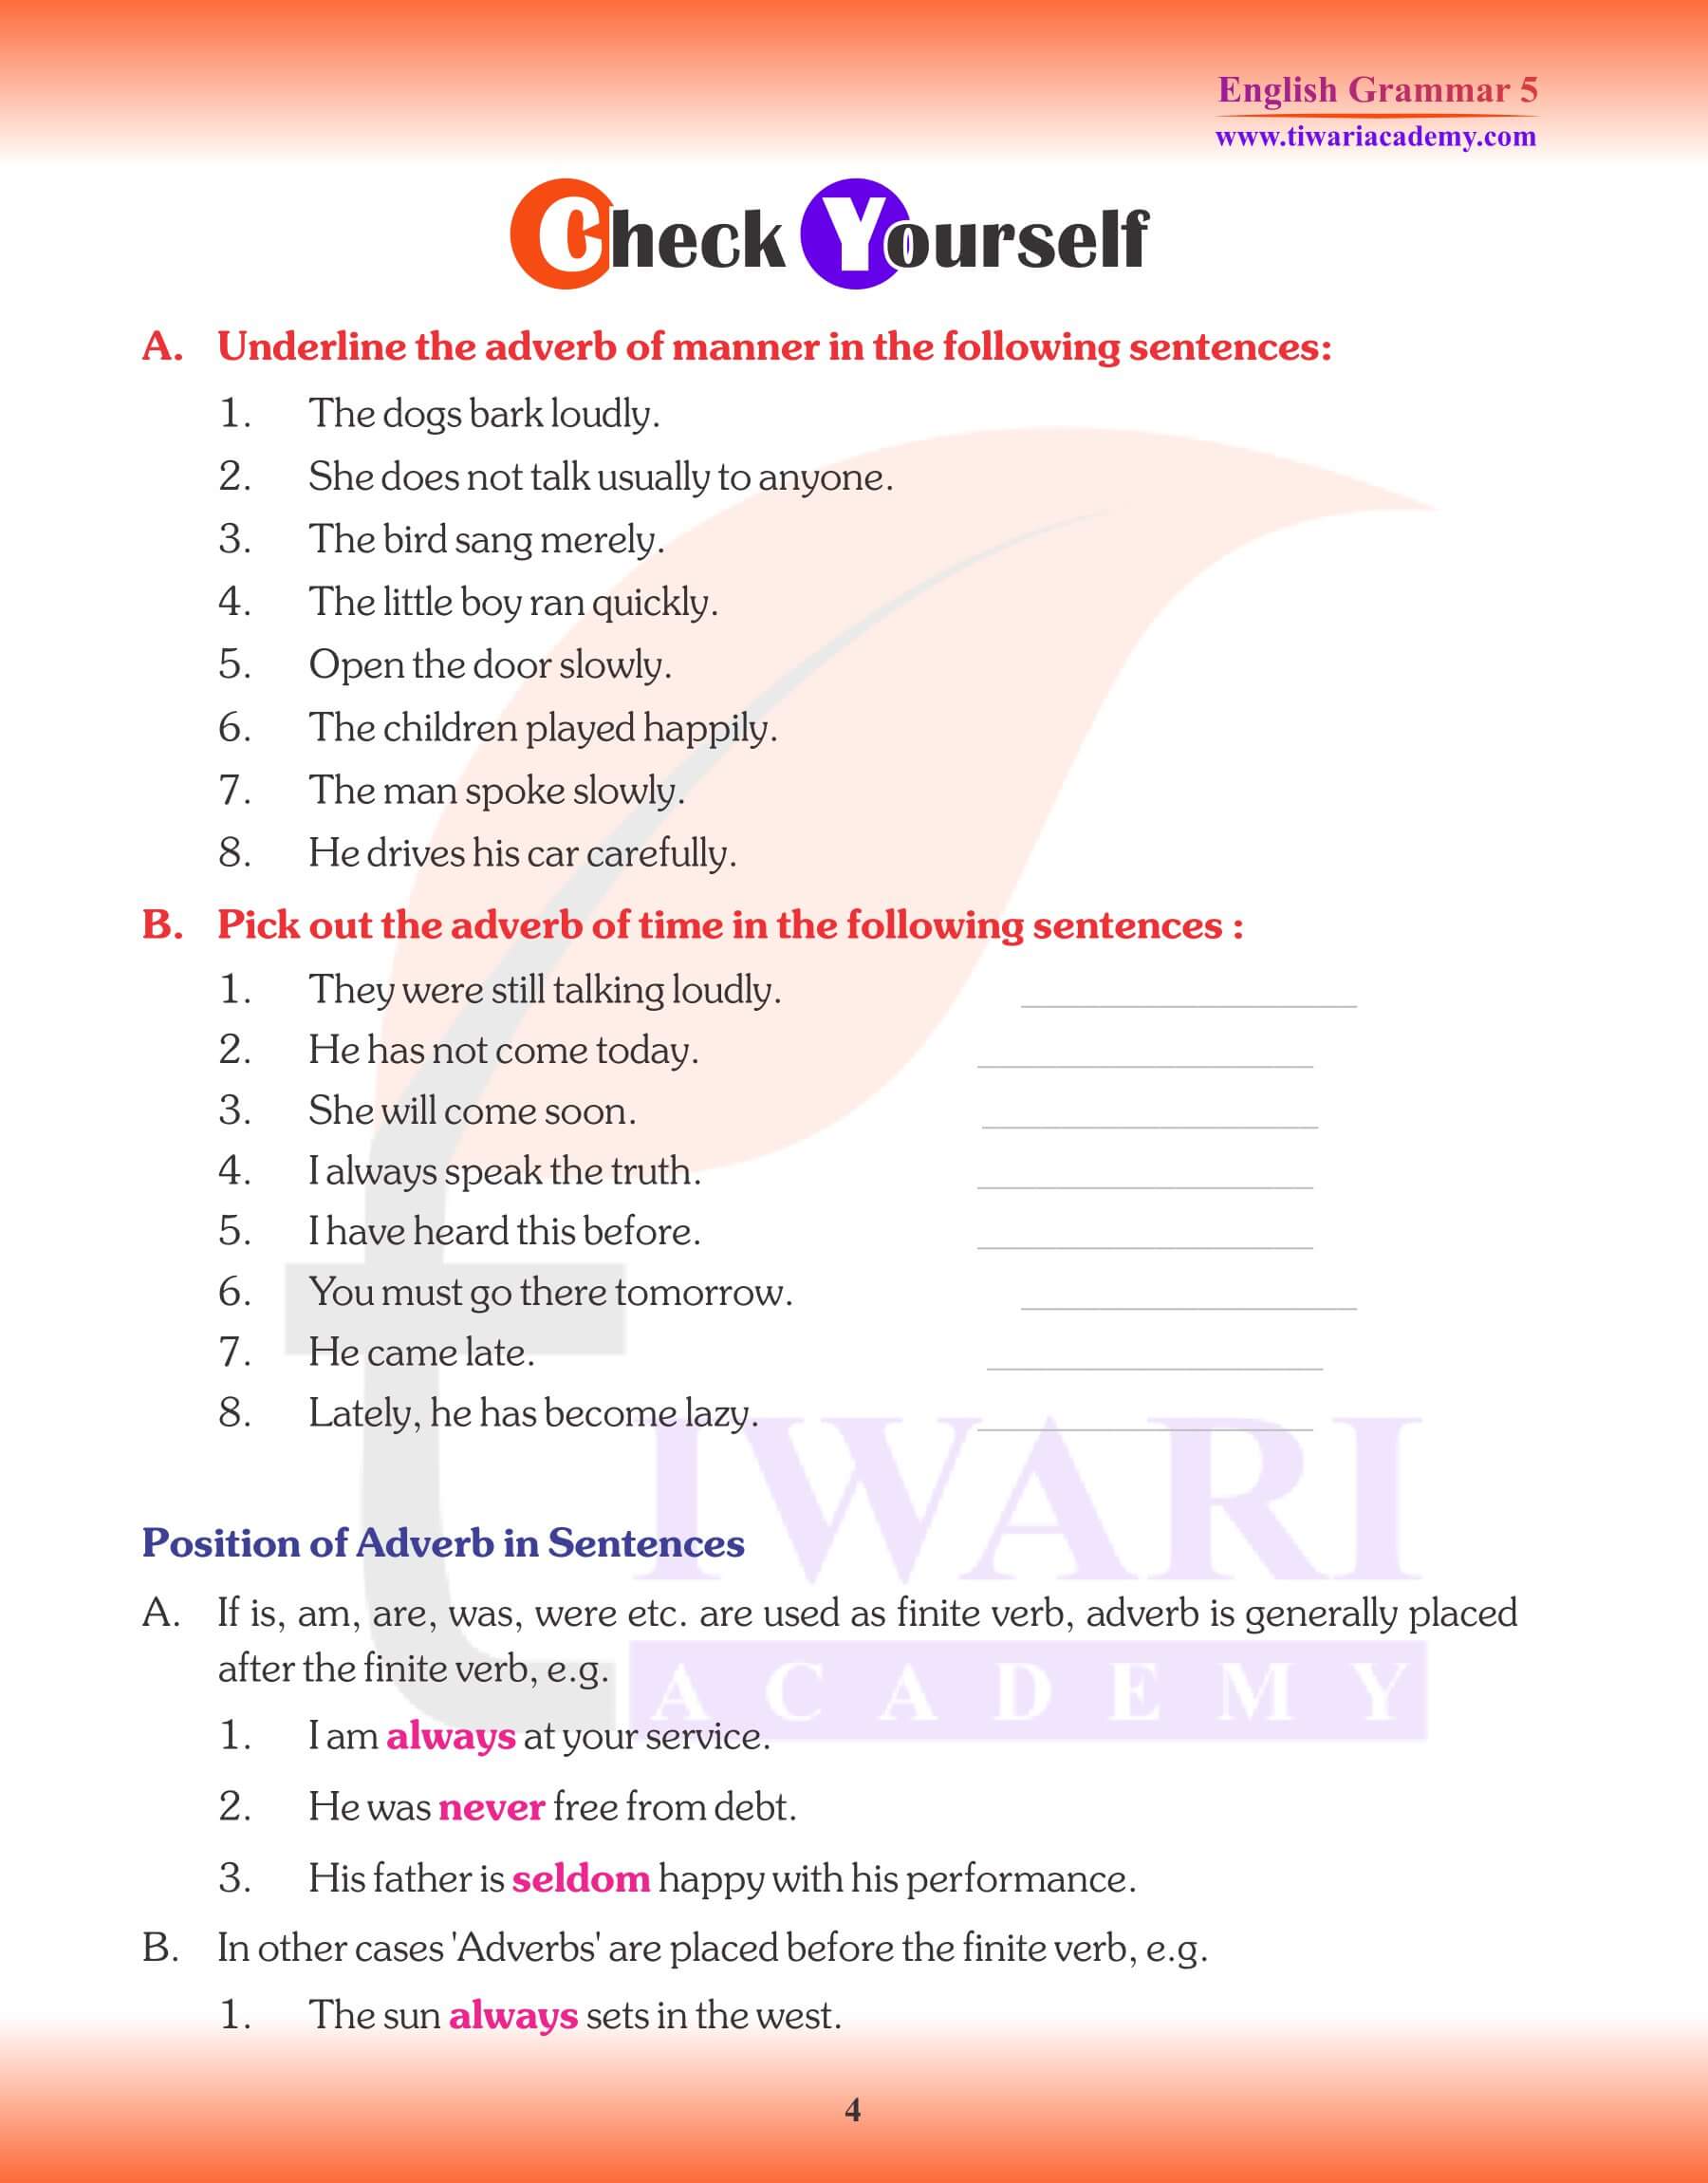 Class 5 English Grammar Adverbs Question Answers